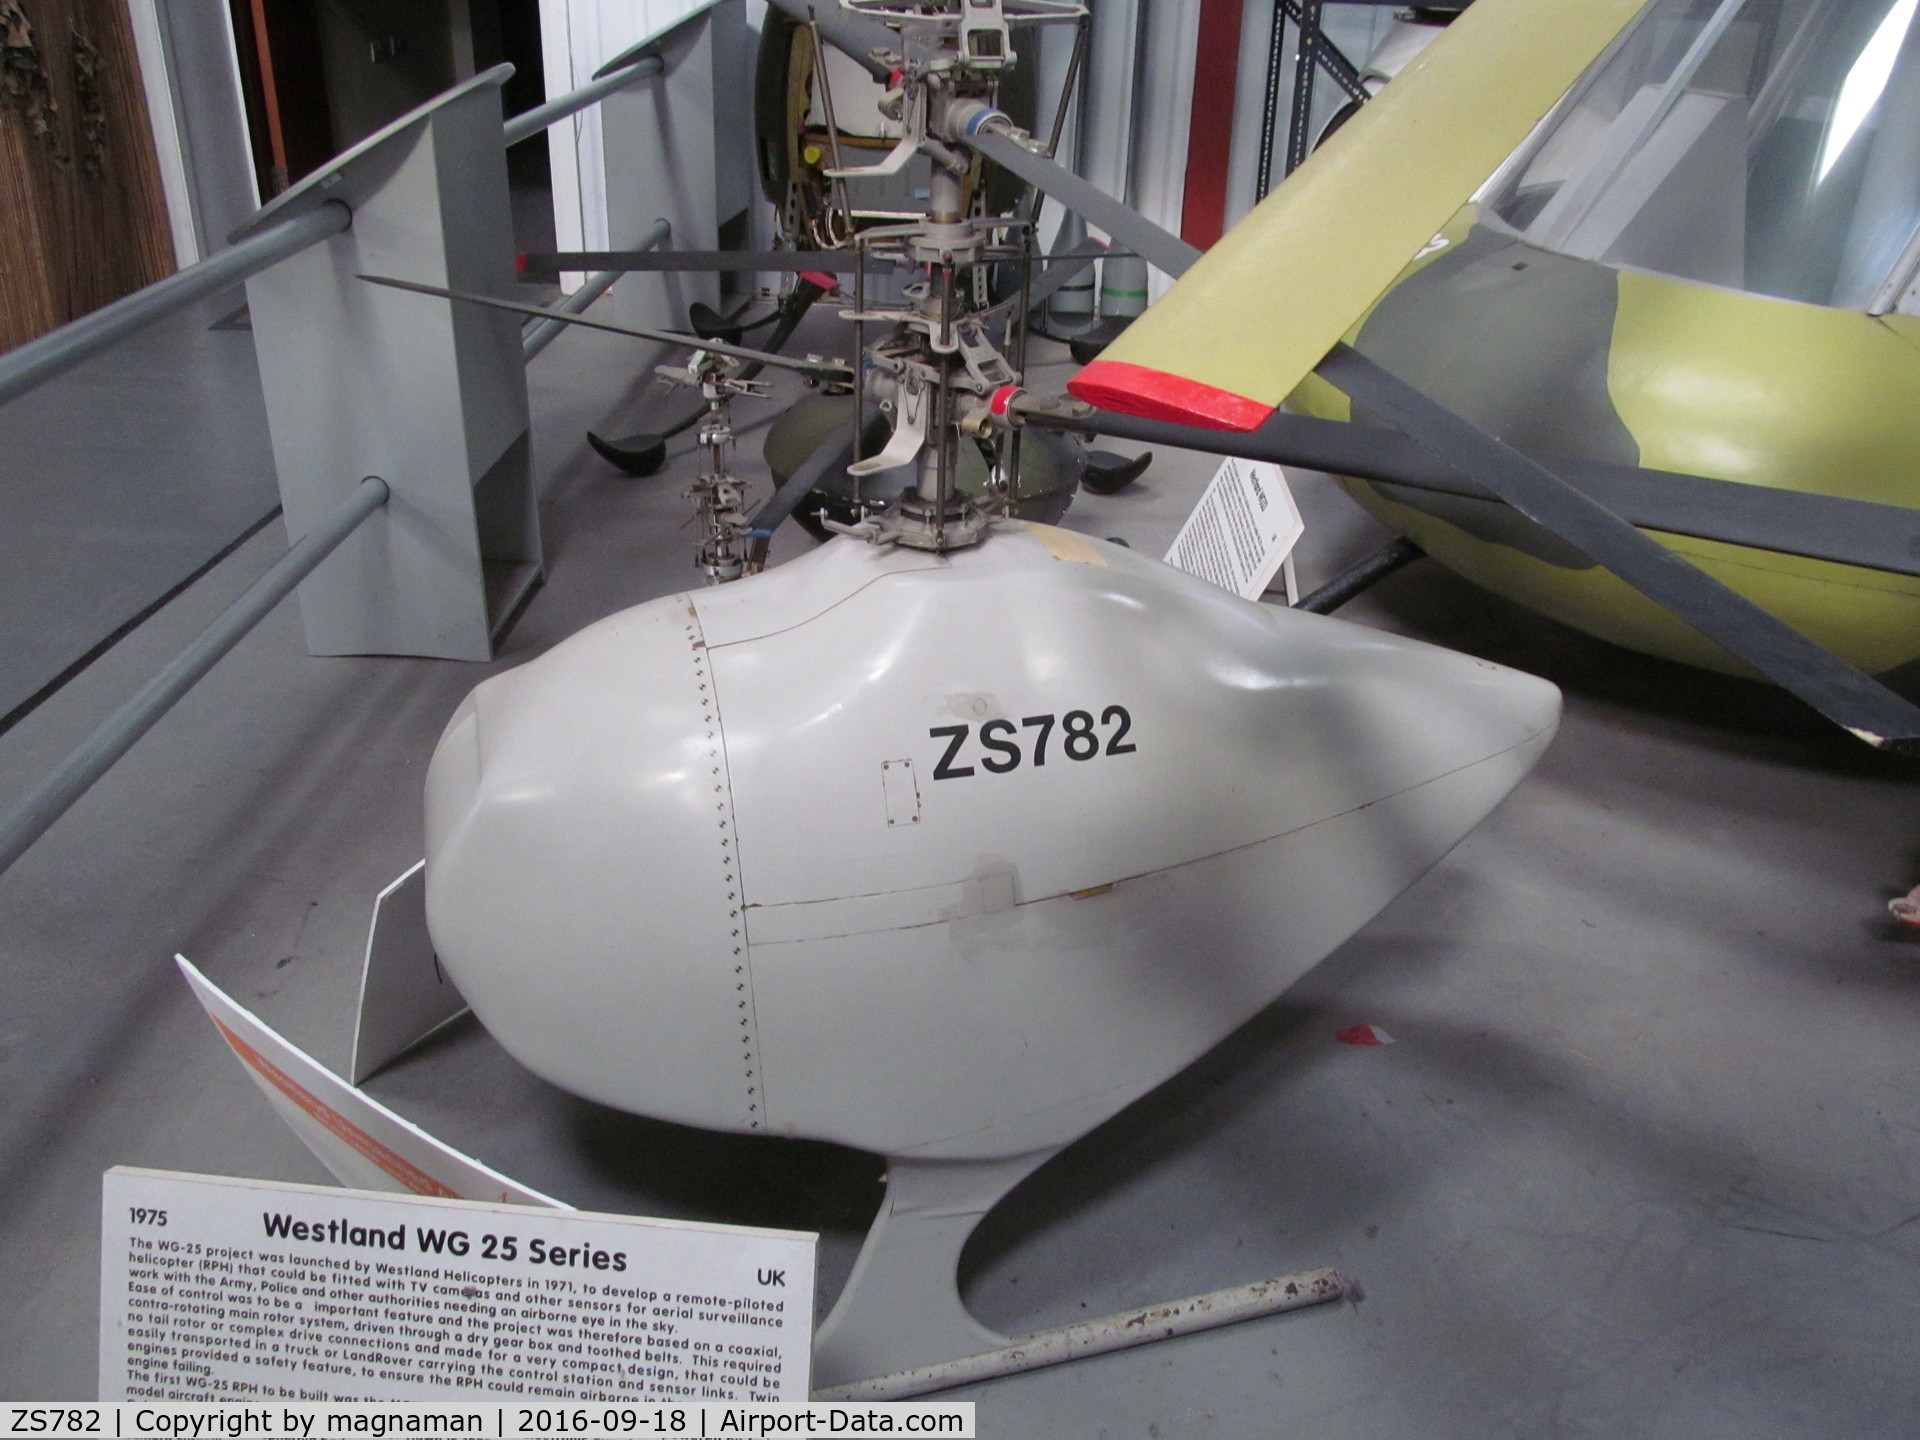 ZS782, Westland WG25 RPH Sharpeye C/N Not found, mock up drone prototype - at a great museum in Weston super mare